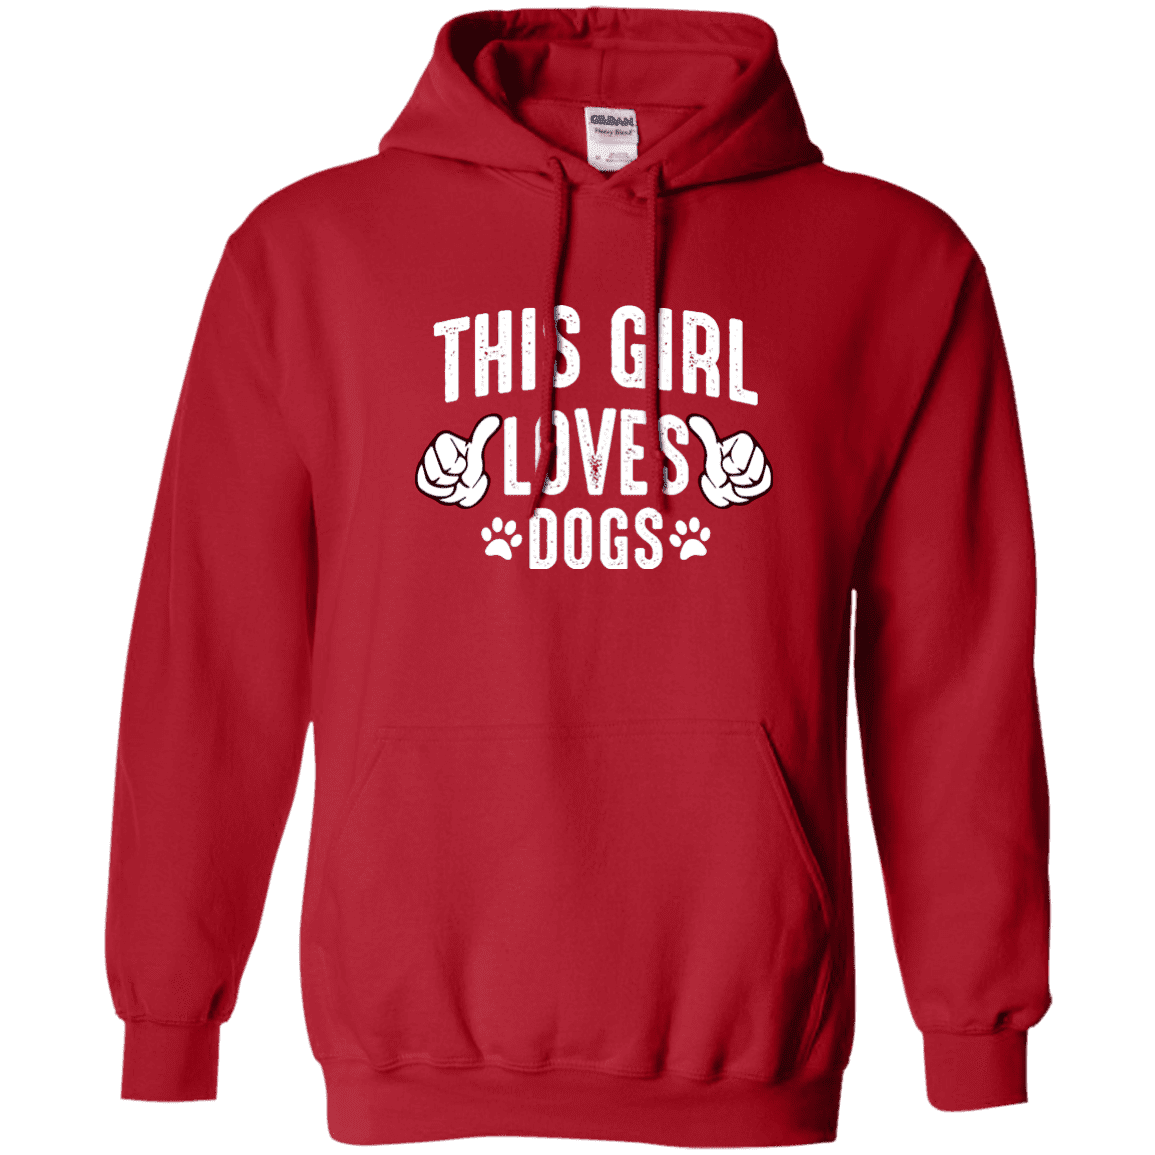 This Girl Loves Dogs - Hoodie.